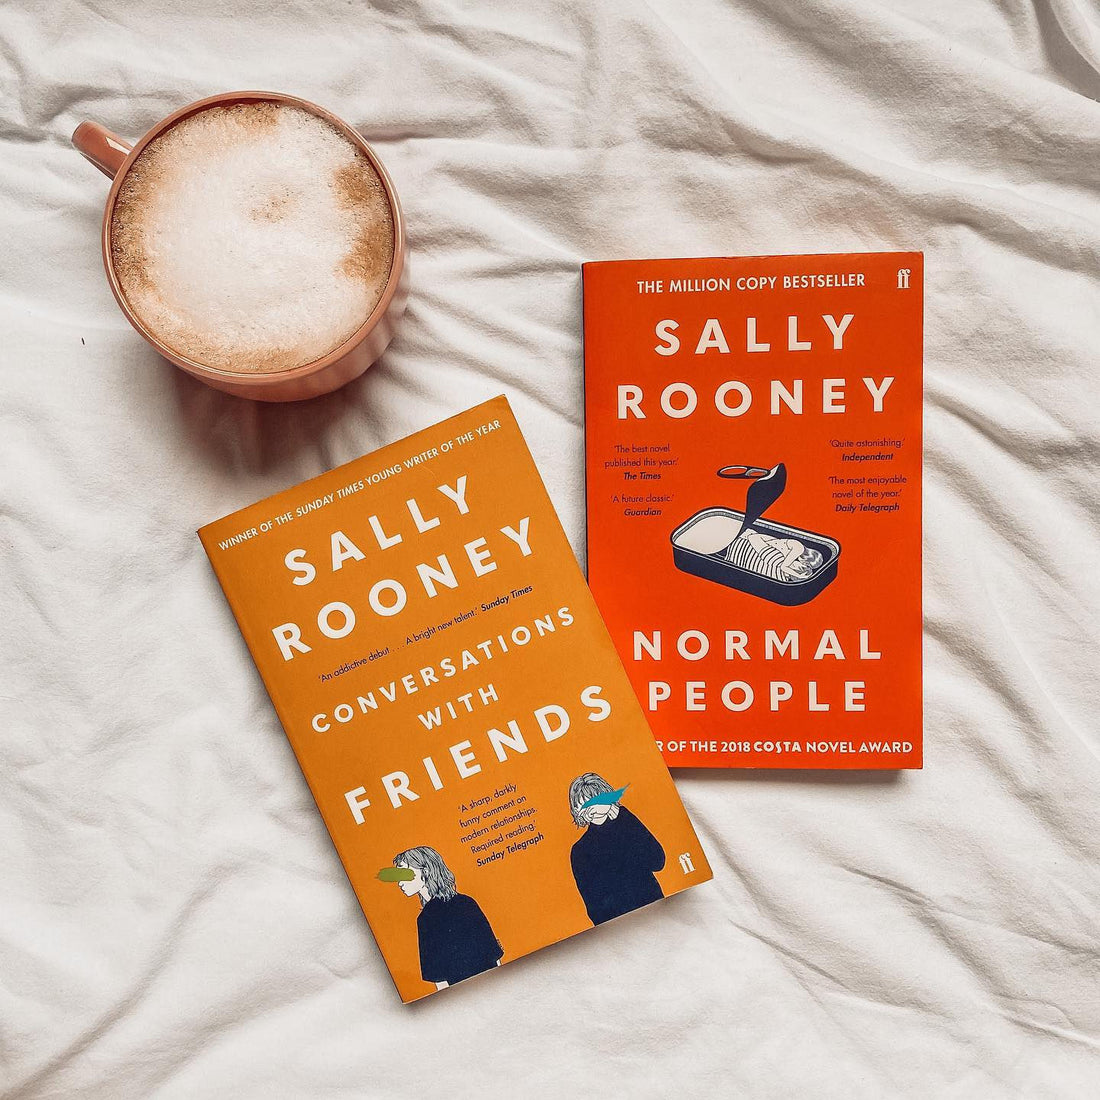 Book Review: Normal People - Sally Rooney